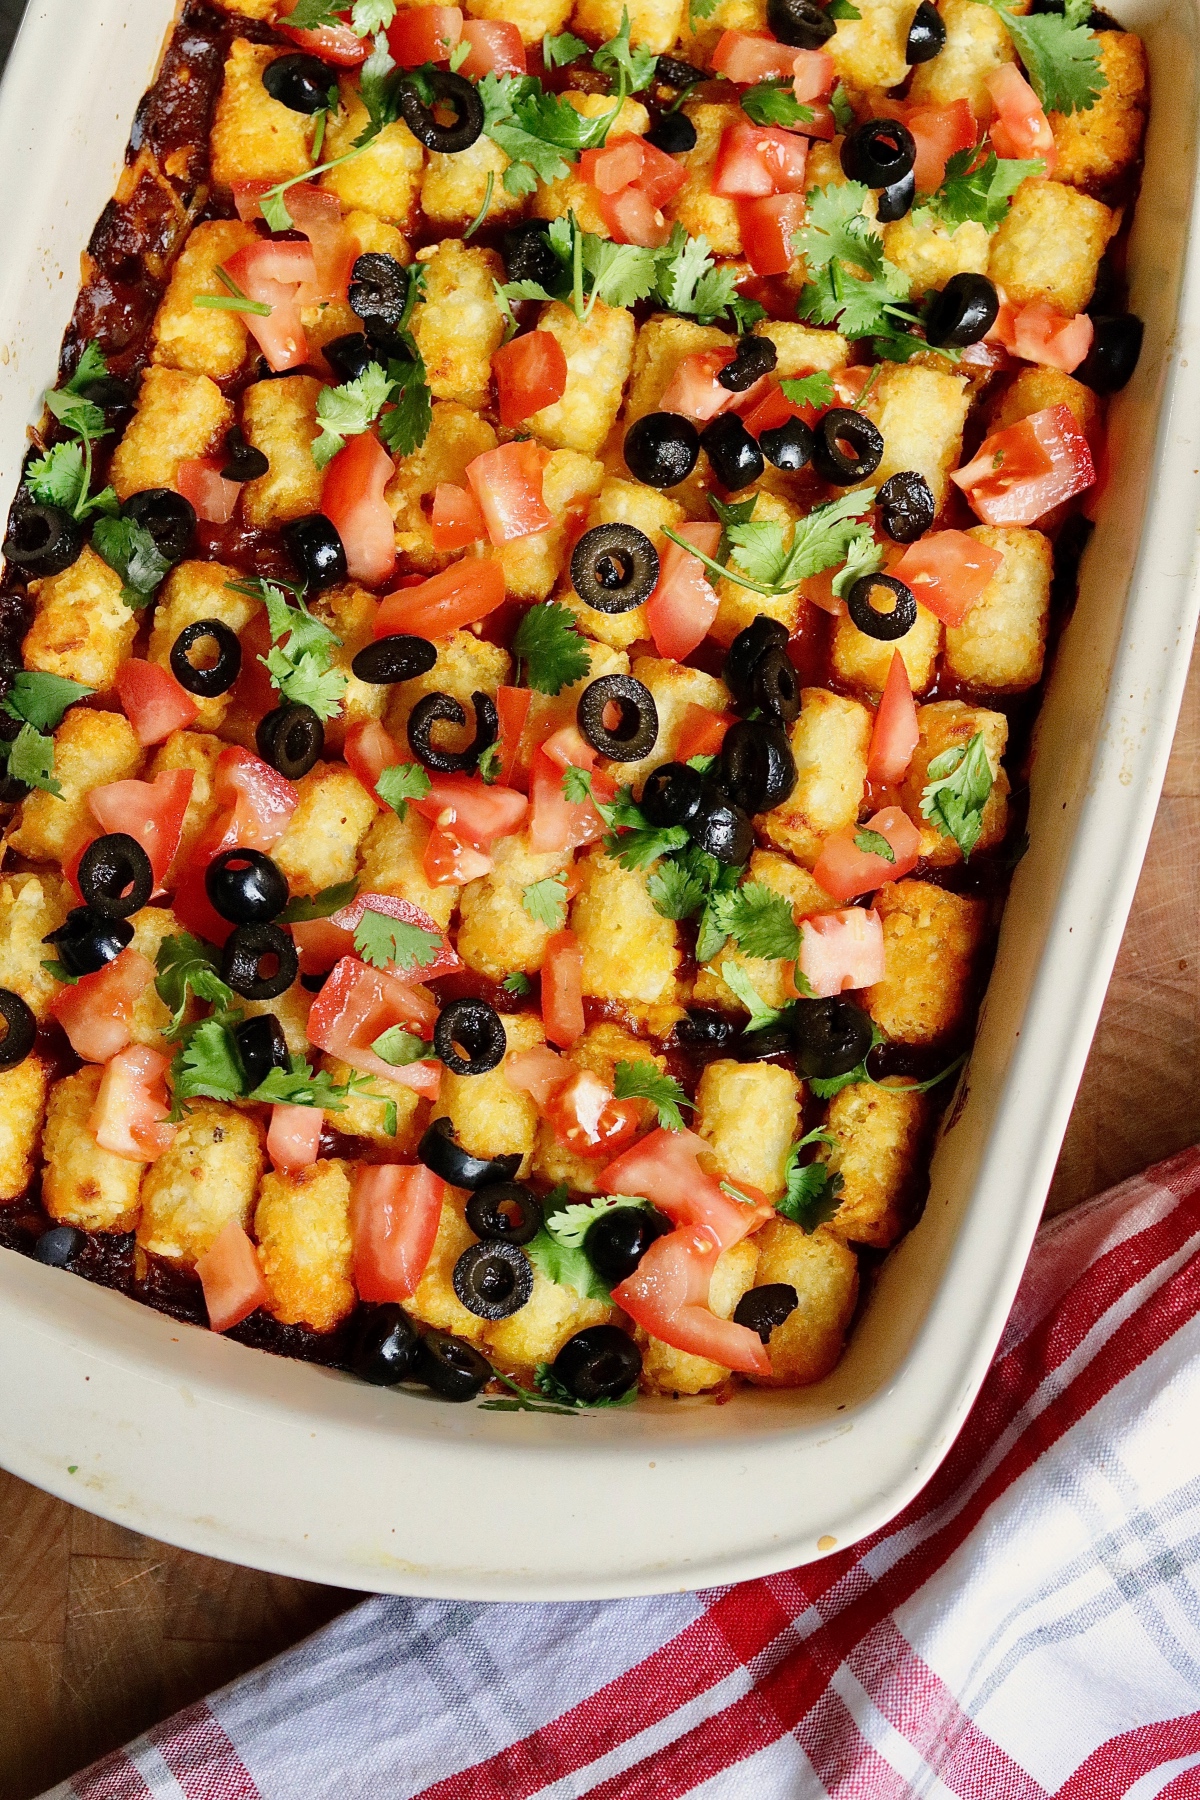 vegan tater tot casserole baked in dish and ready to serve